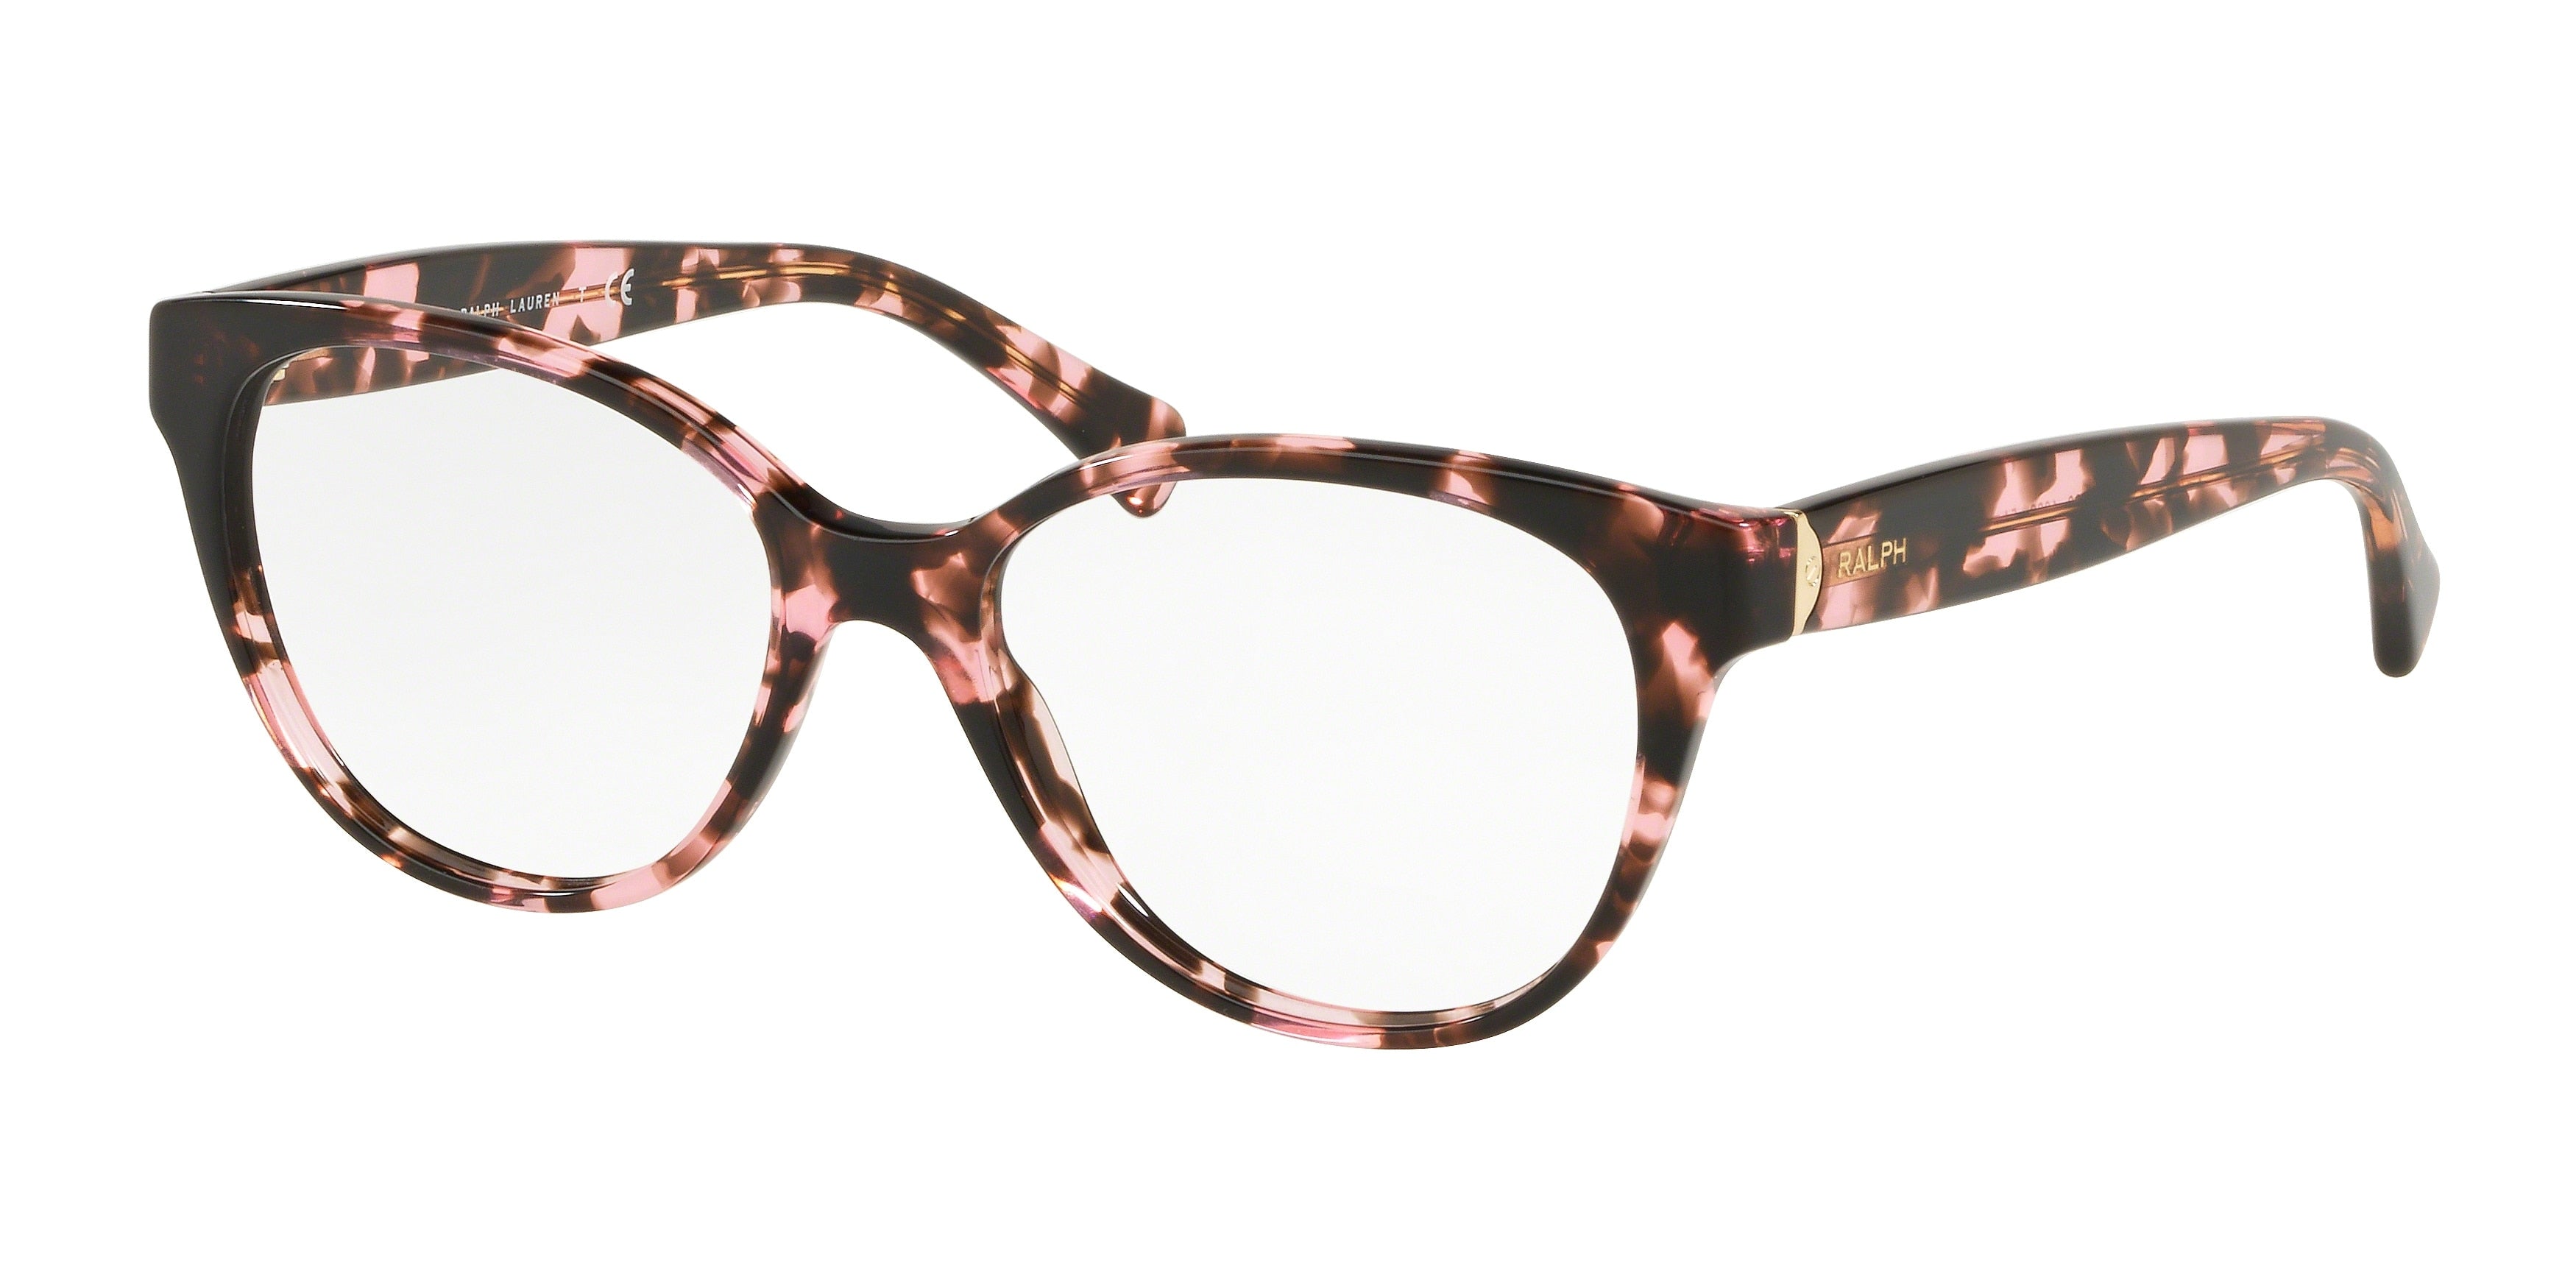 Ralph RA7103 Butterfly Eyeglasses  1693-Shiny Pink Tortoise 52-140-17 - Color Map Pink